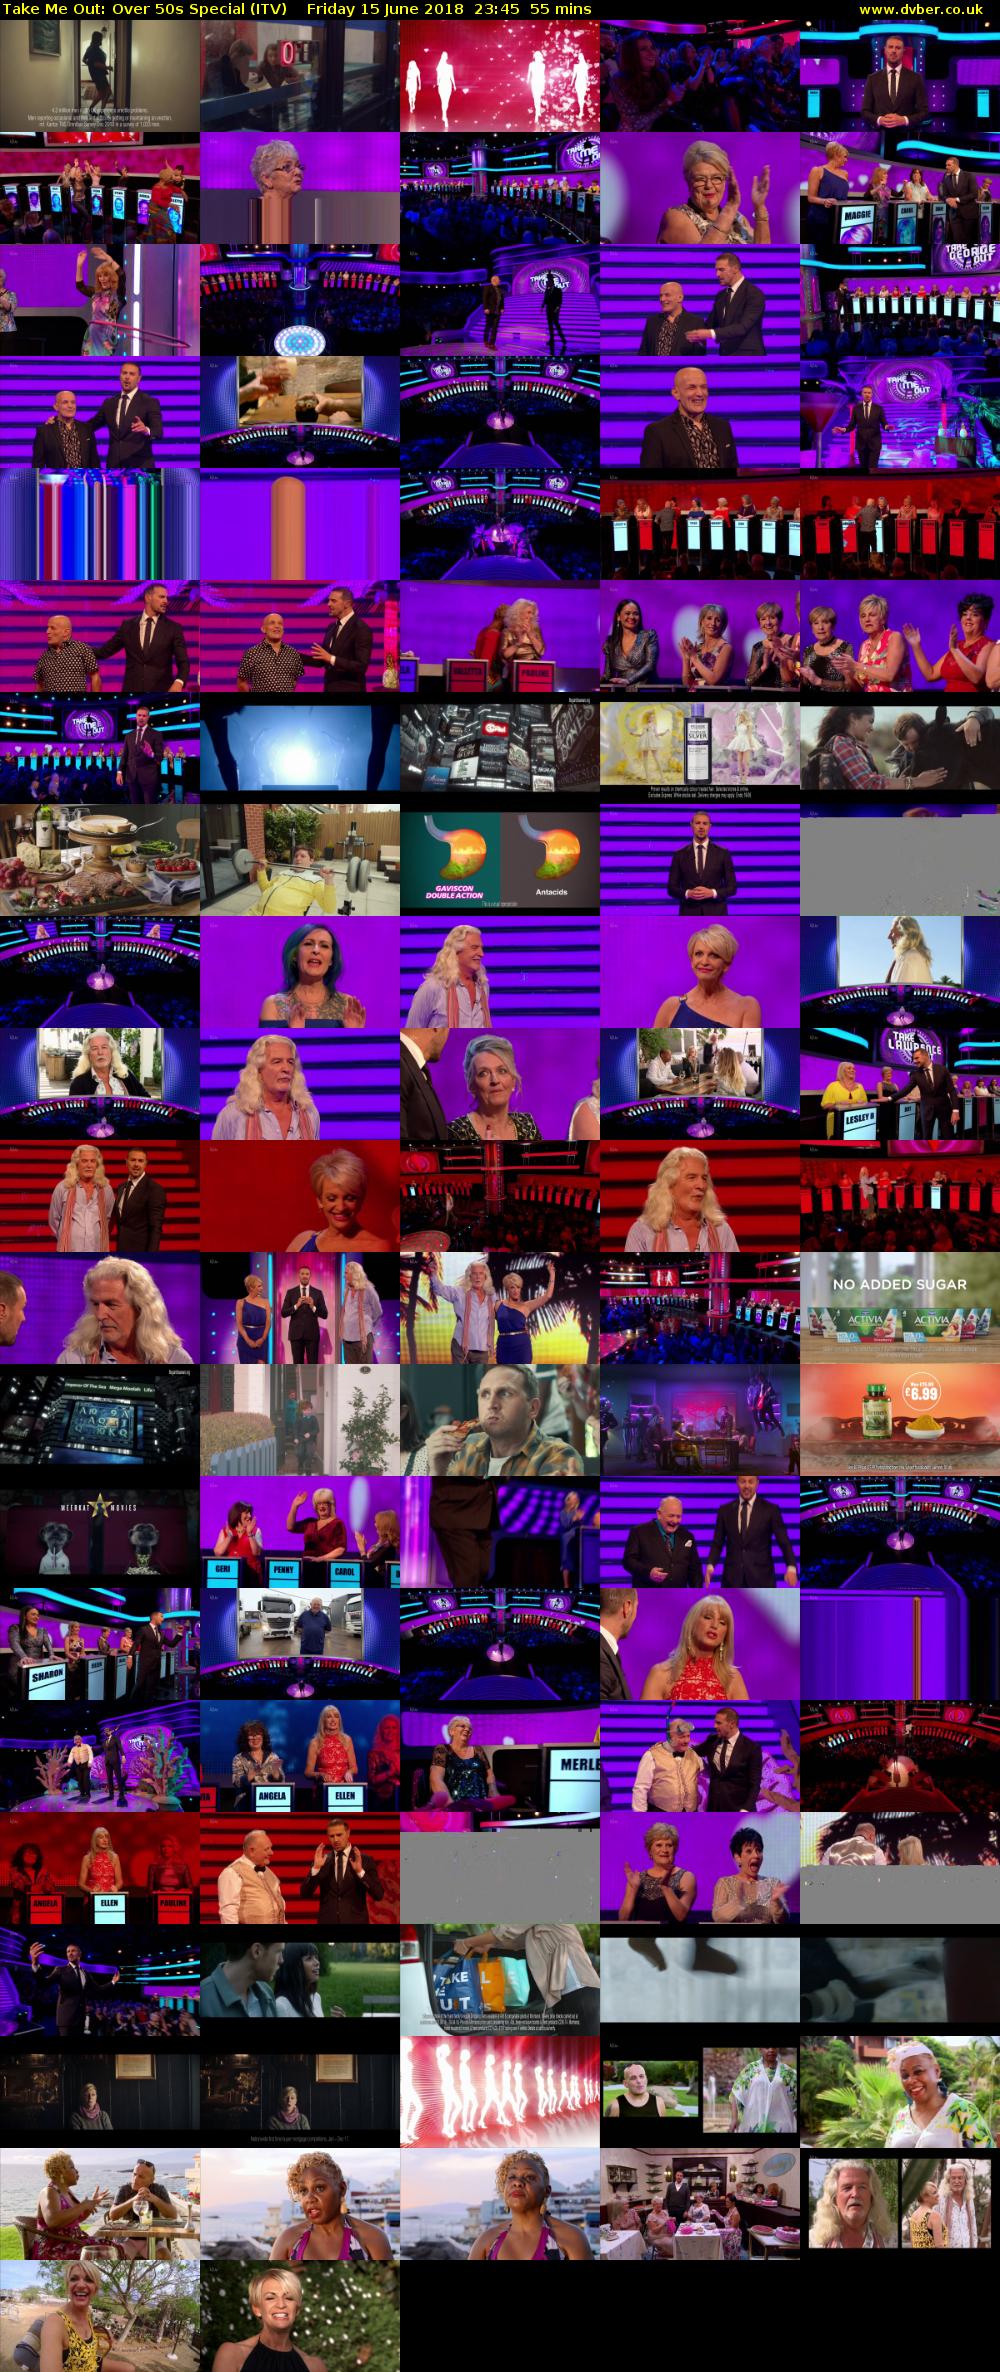 Take Me Out: Over 50s Special (ITV) Friday 15 June 2018 23:45 - 00:40